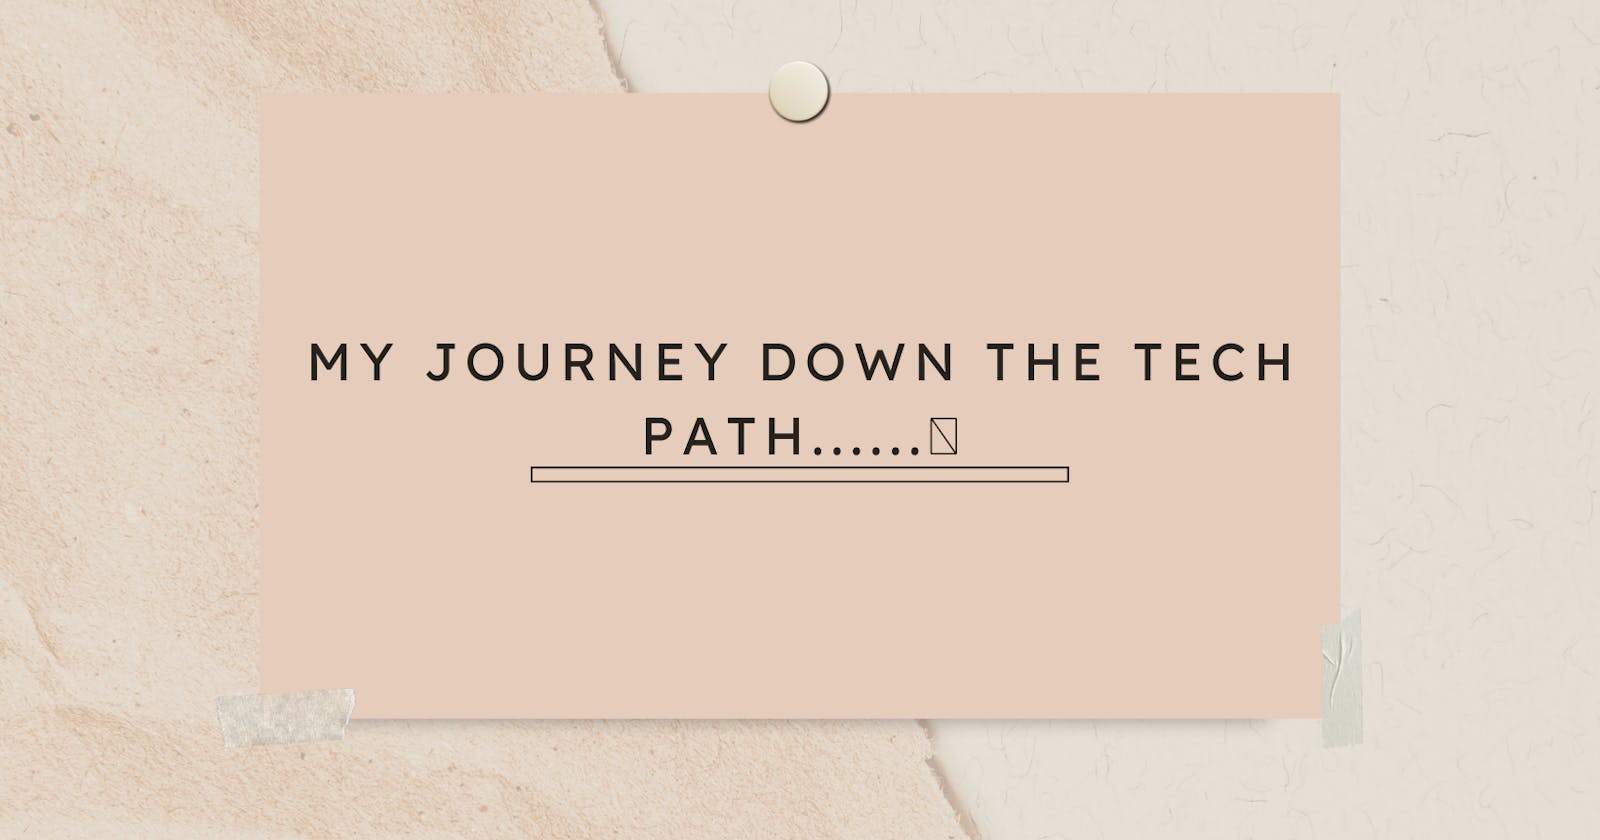 My Journey Down the Tech Path........</code>